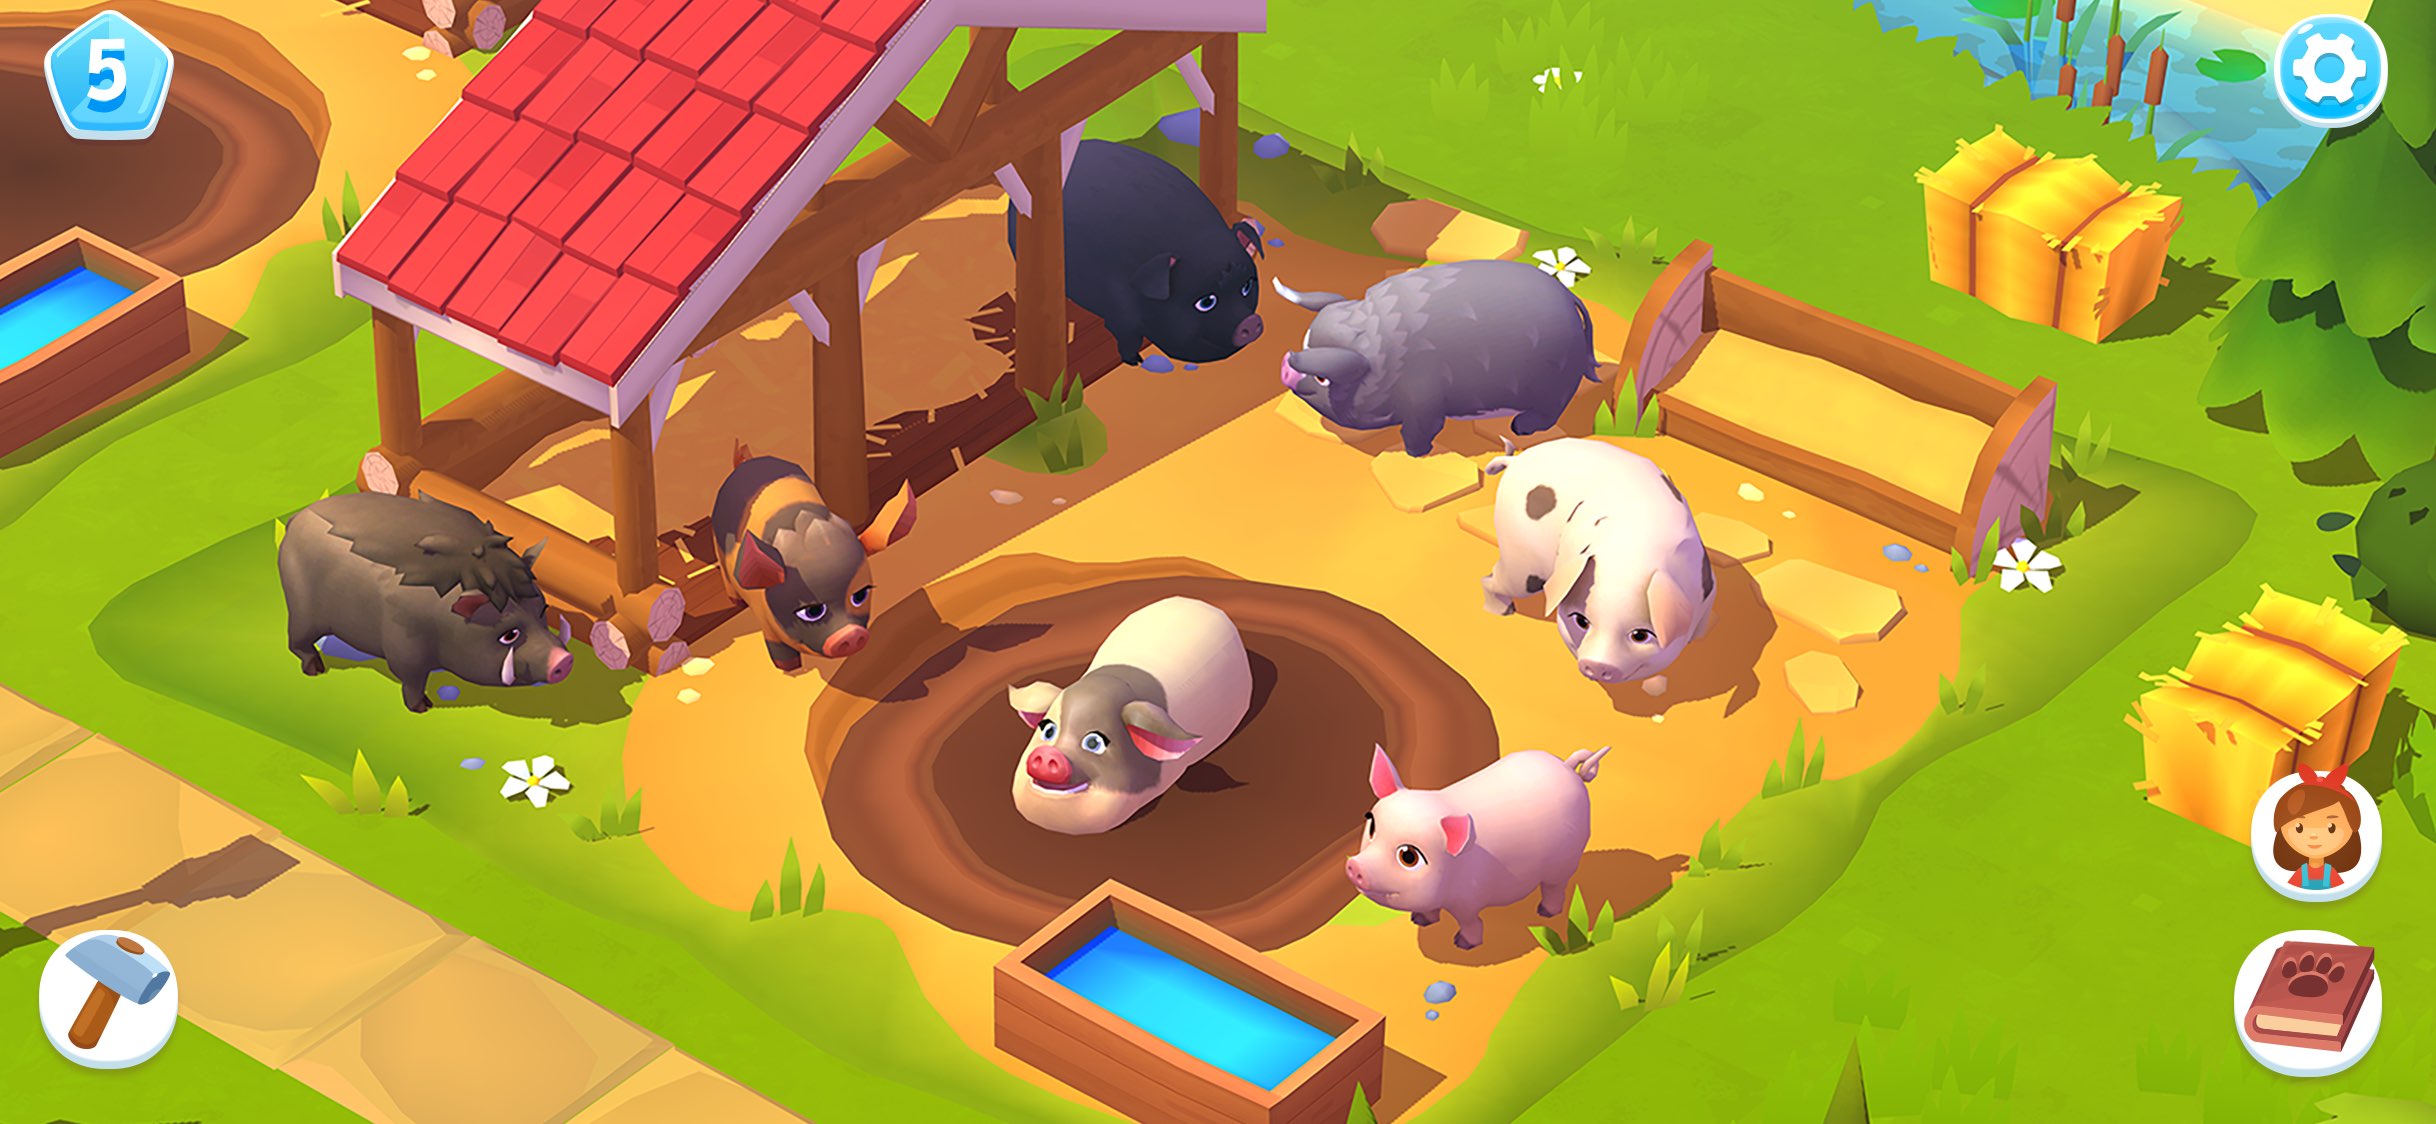 ainmal collection in FarmVille 3 mod apk